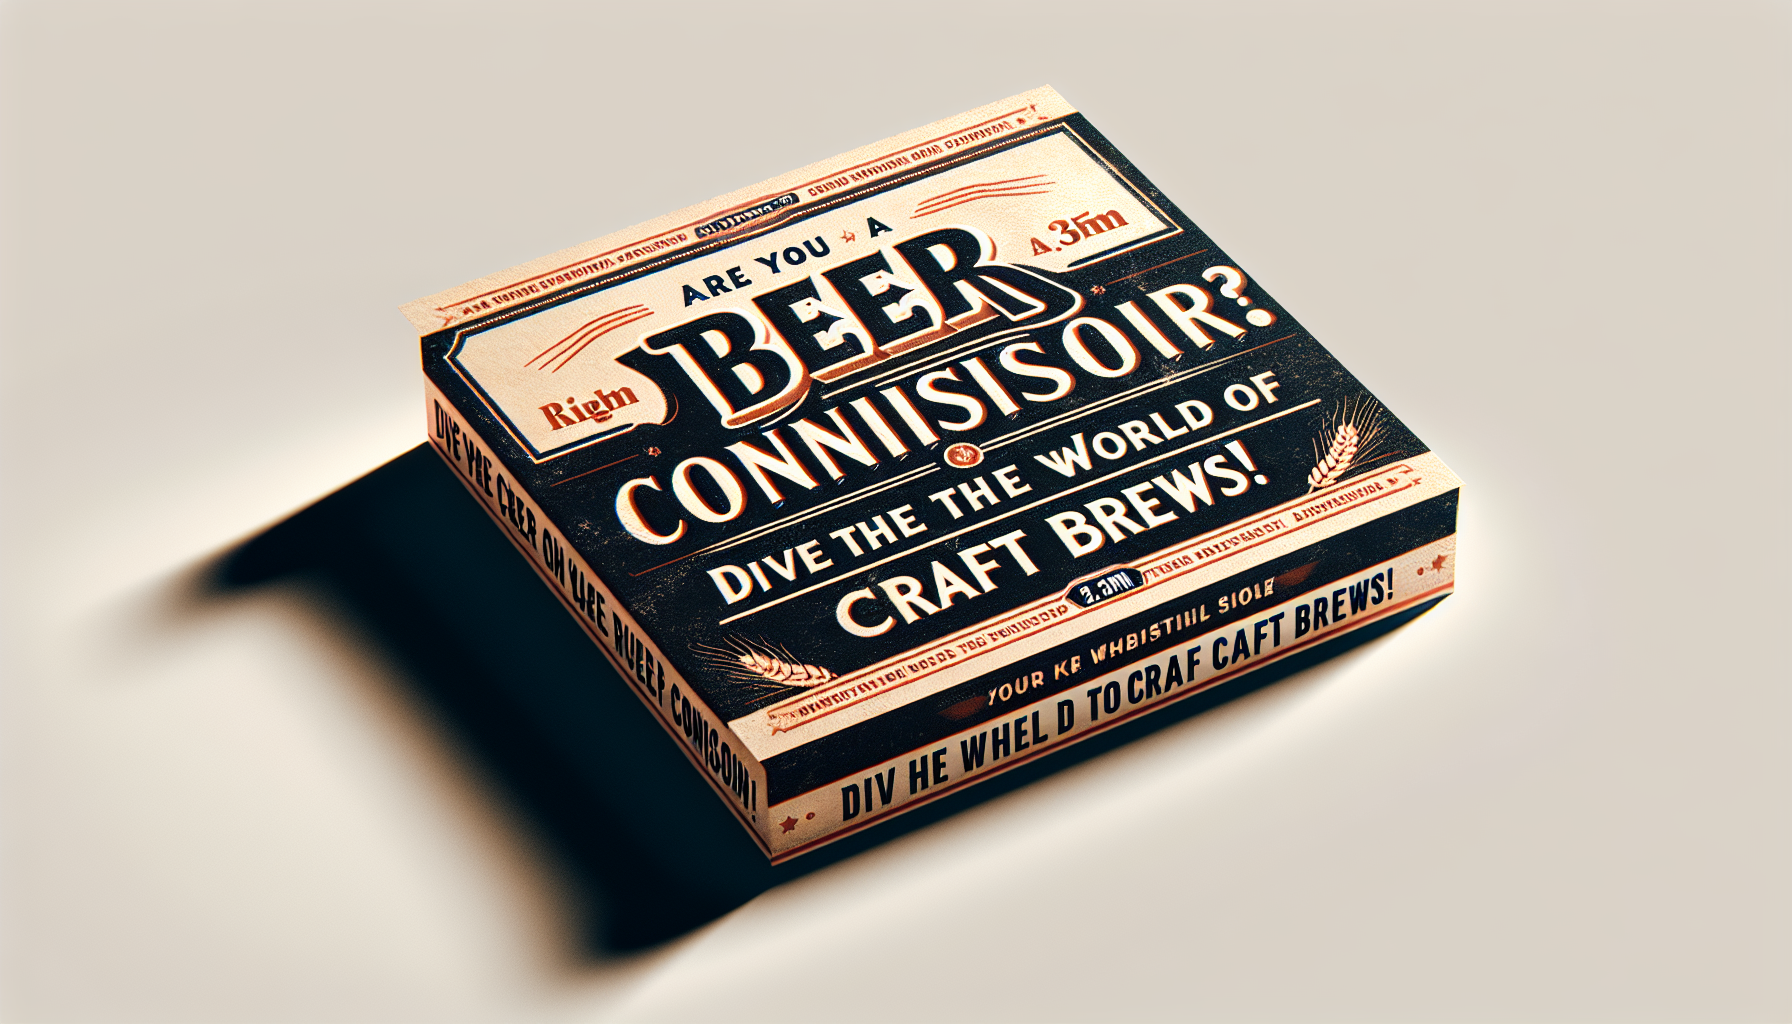 Are You a Beer Connoisseur? Dive into the World of Craft Brews!